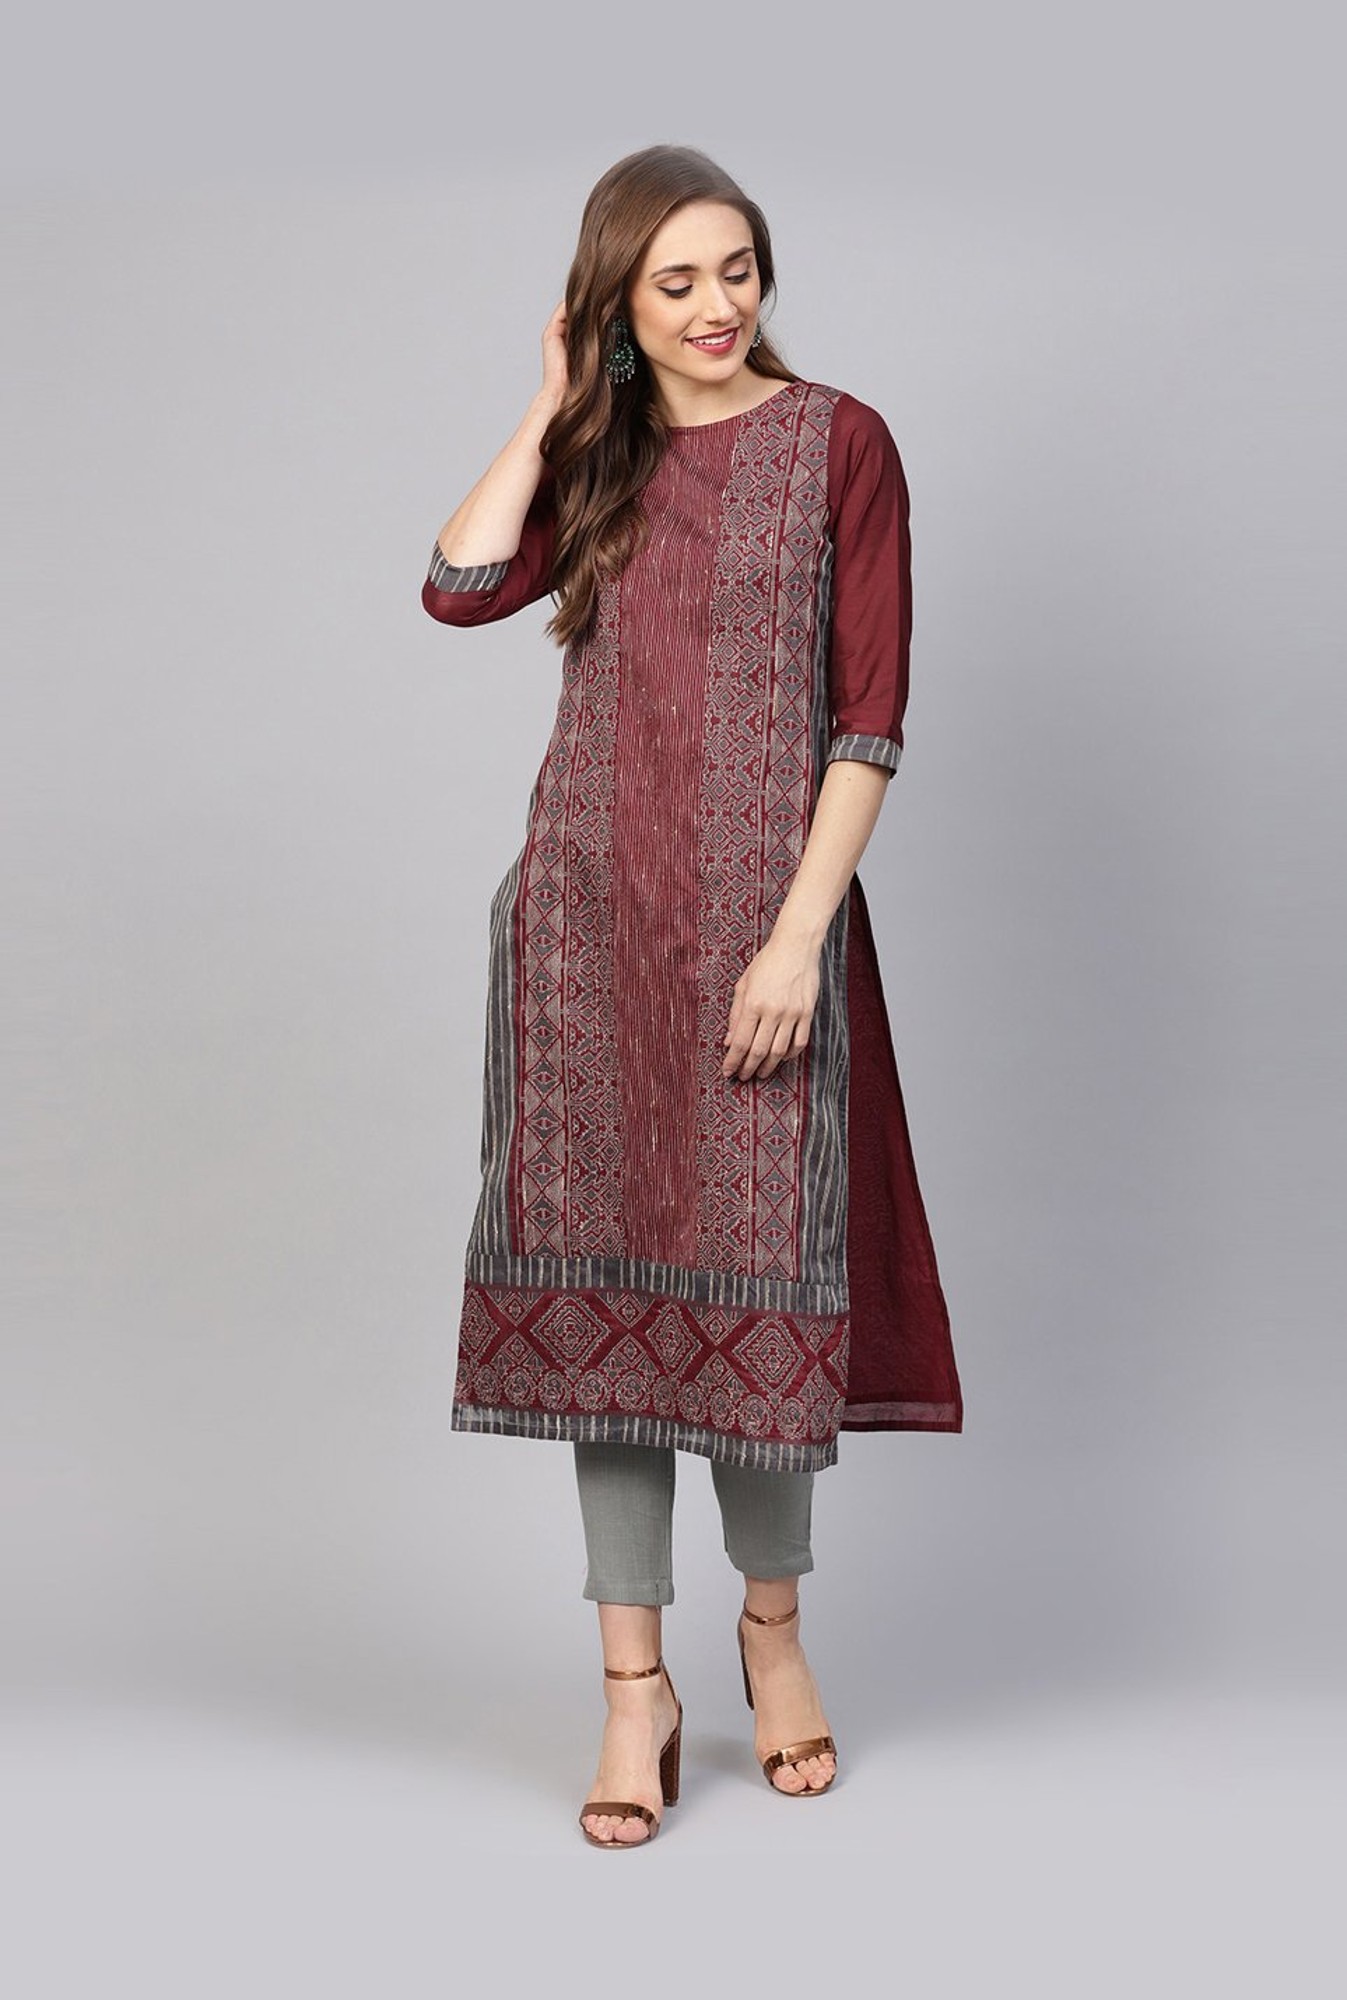 Details more than 85 combination with grey kurti best  thtantai2